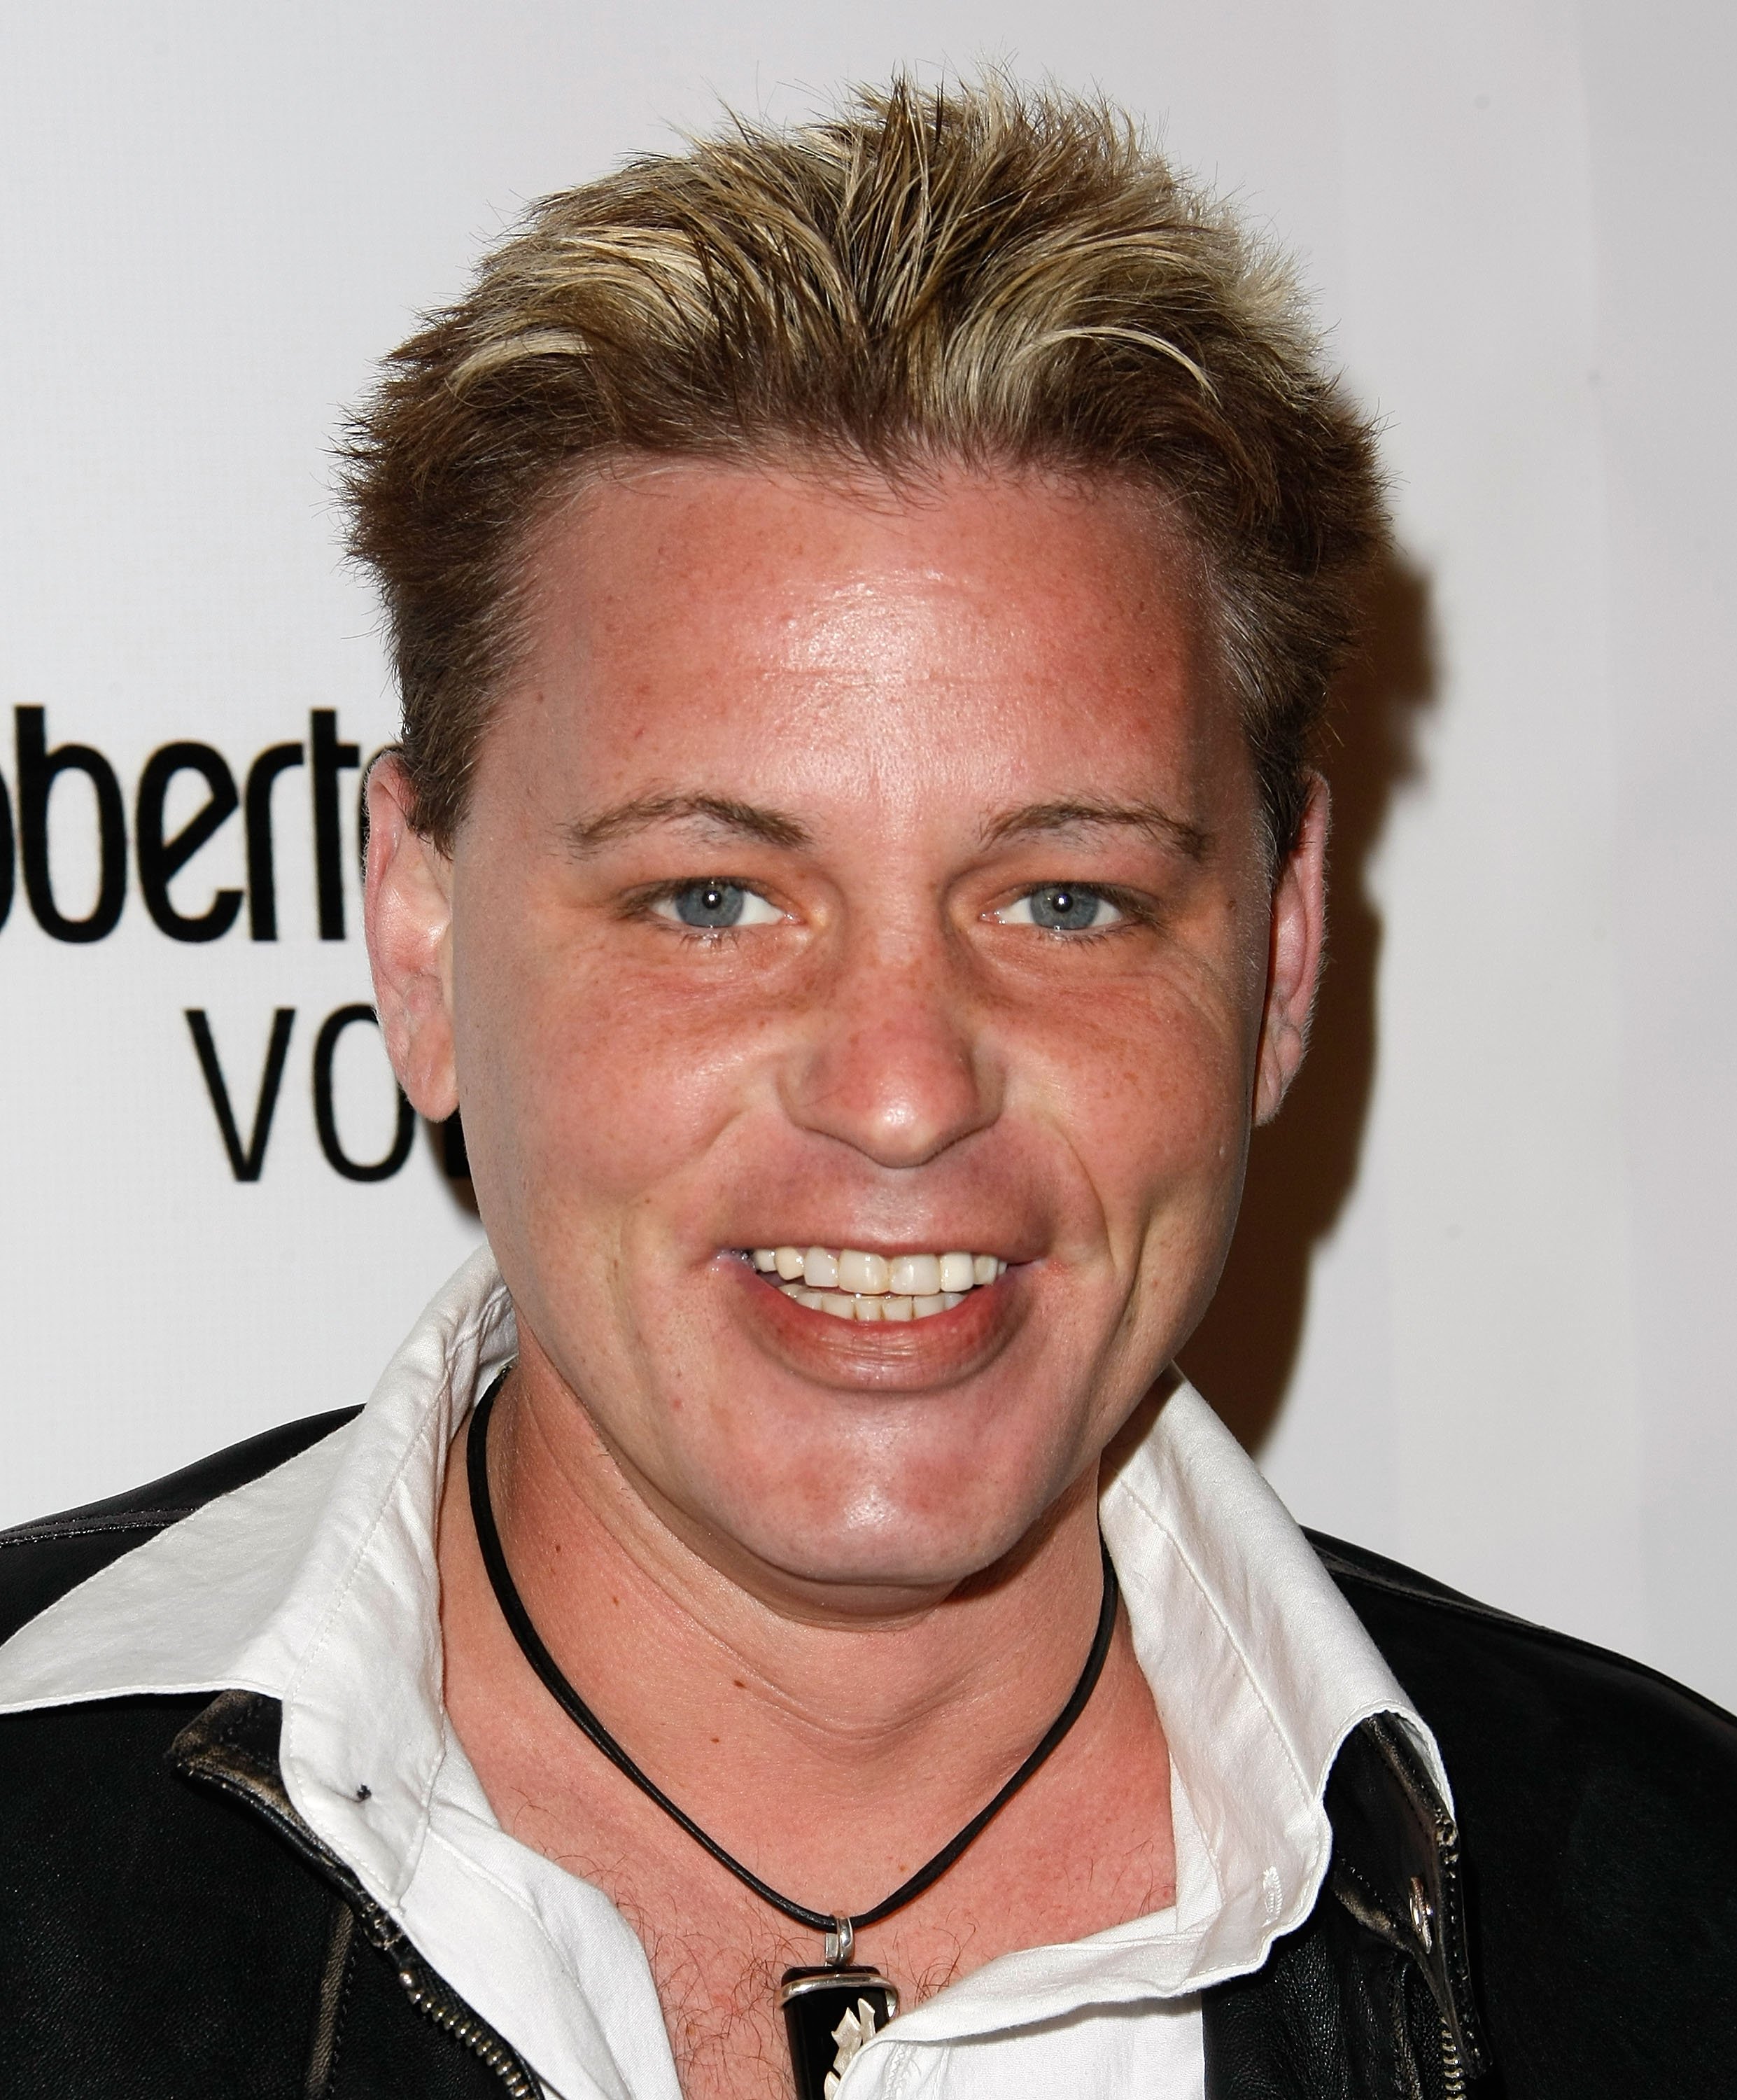 Corey Haim arrives at a Fashion Show on March 19, 2009, in Hollywood, California. | Source: Getty Images.